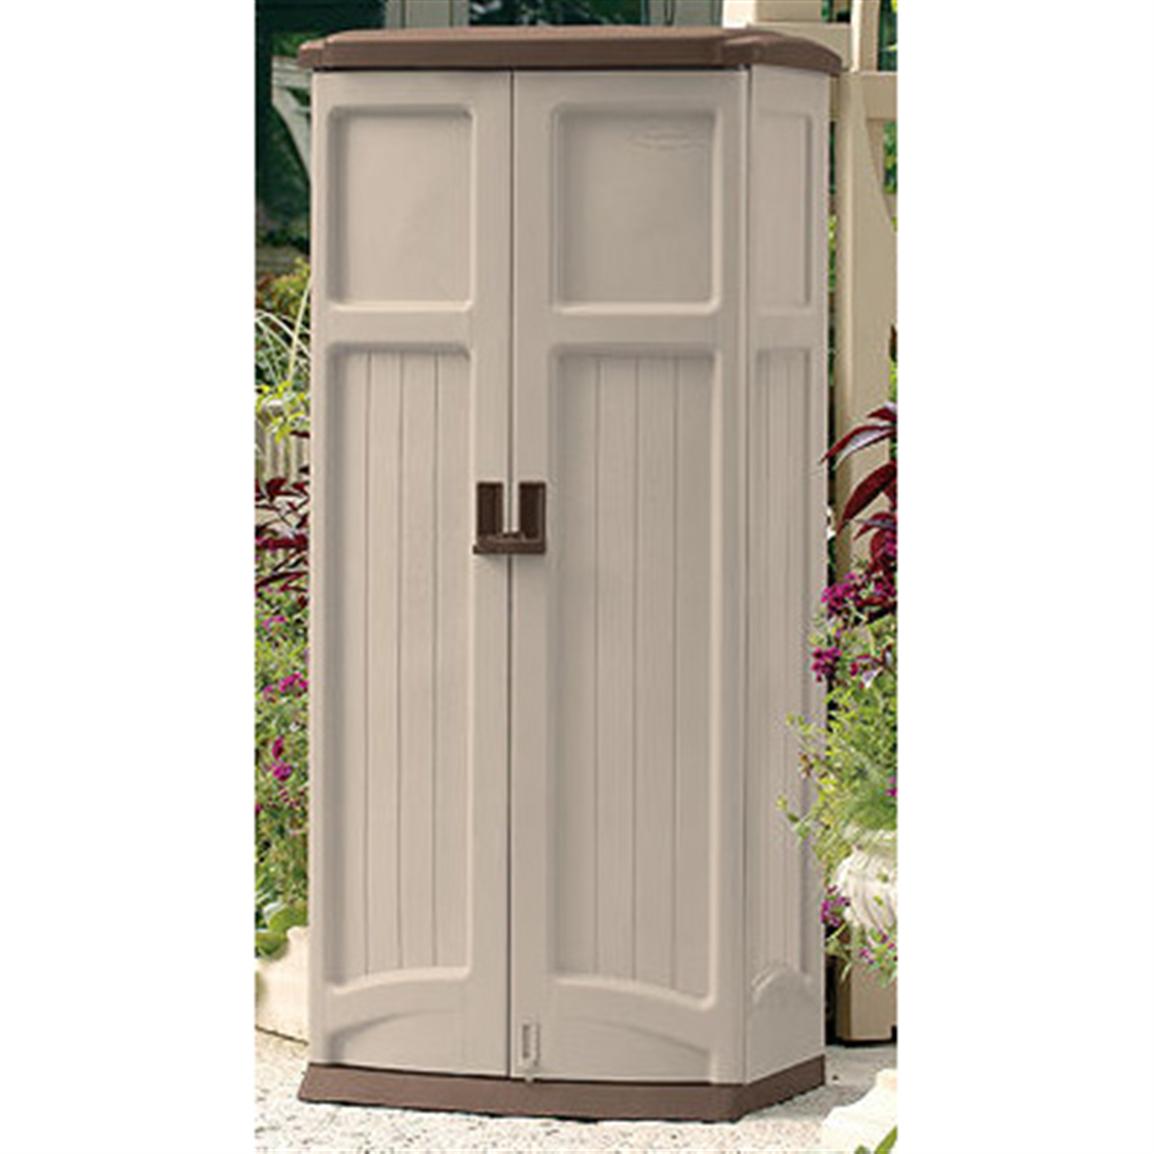 Suncast® Vertical Storage Shed - 138479, Patio Storage at 